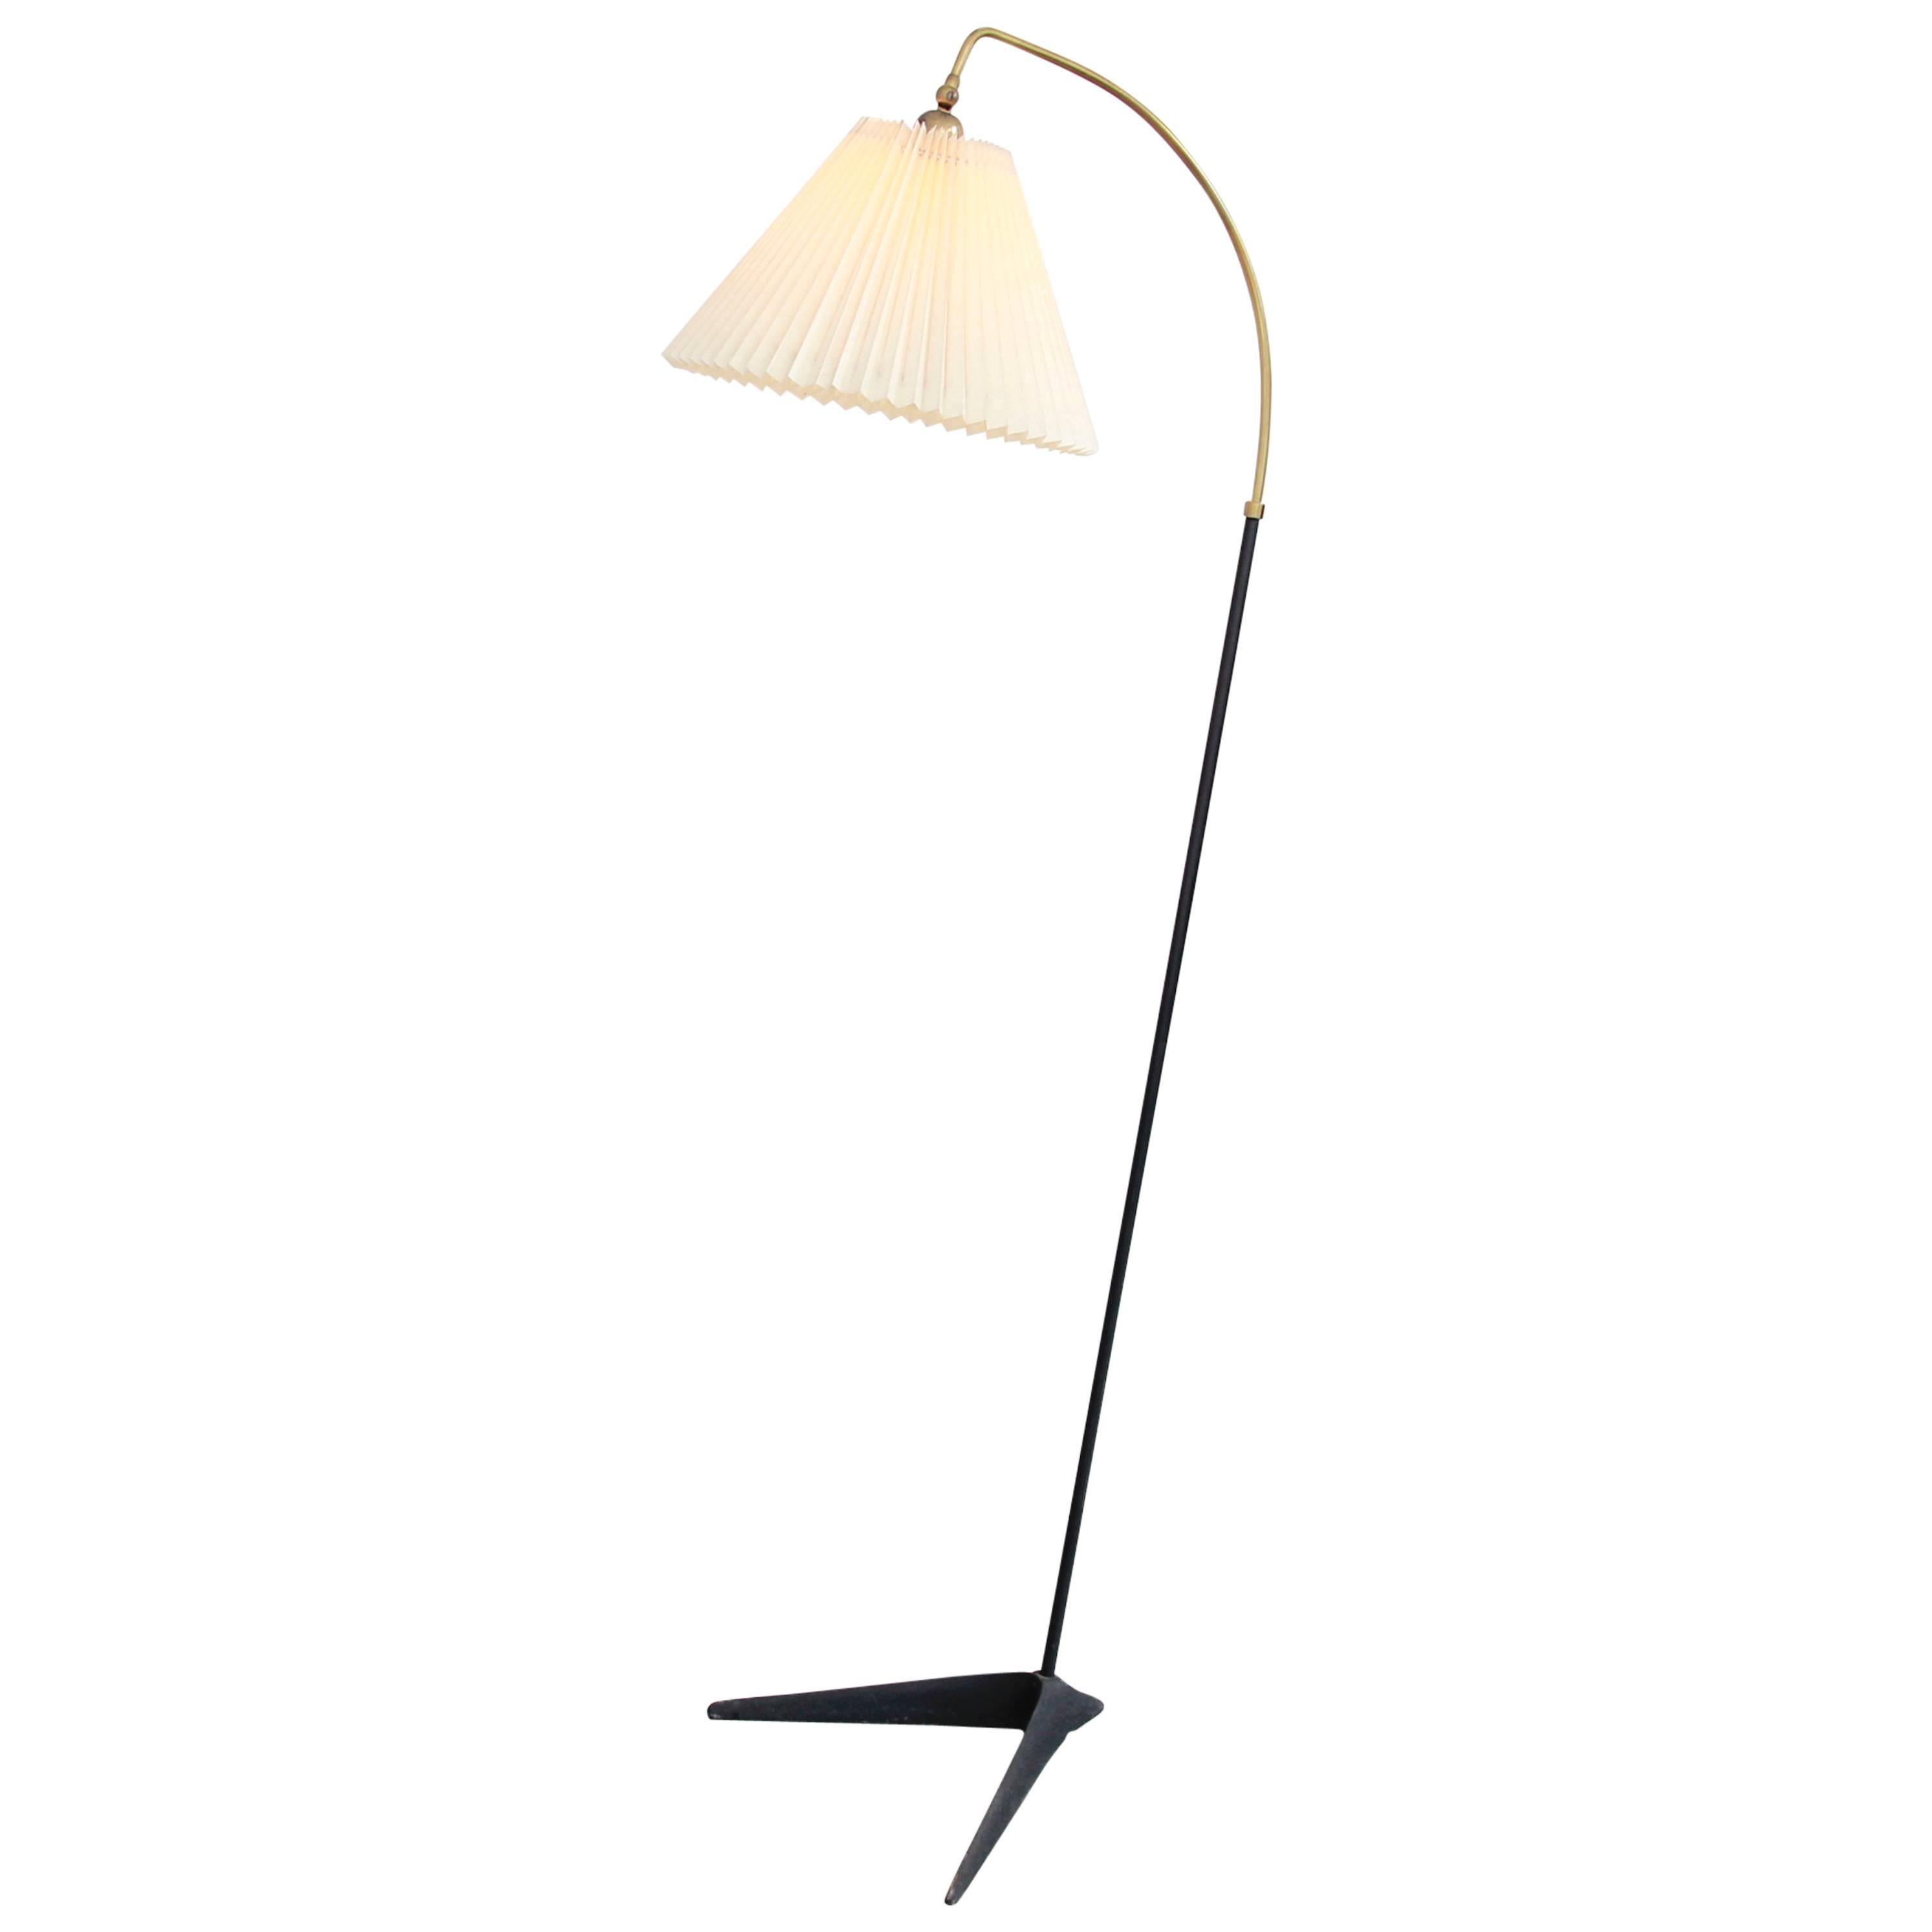 Rare Svend Aage Holm Sørensen Design Standing Lamp with Le Klint Shade For Sale